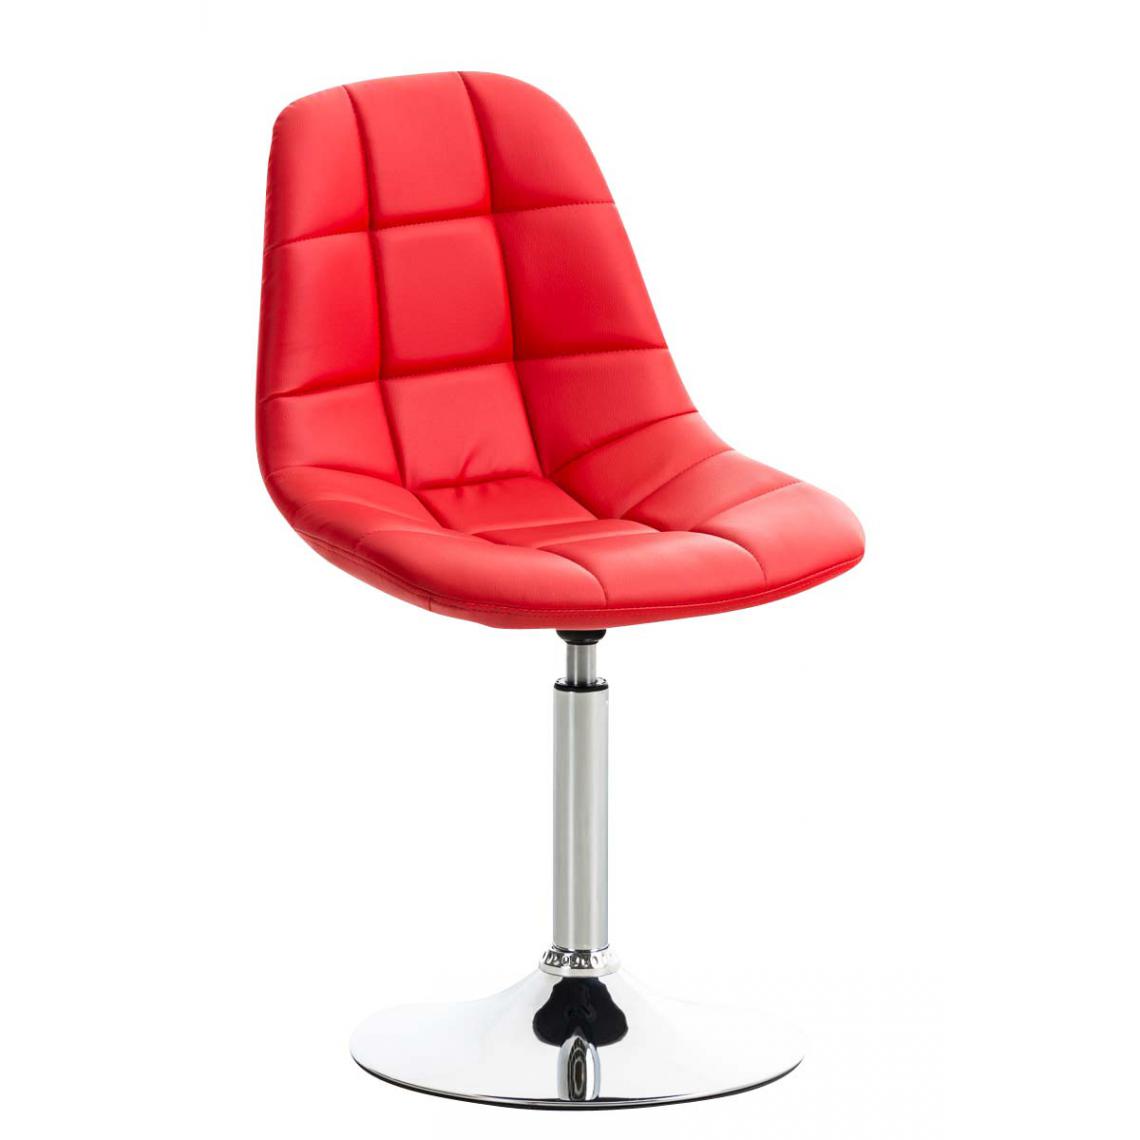 Icaverne - Moderne Chaise en similicuir reference Sanaa couleur rouge - Chaises